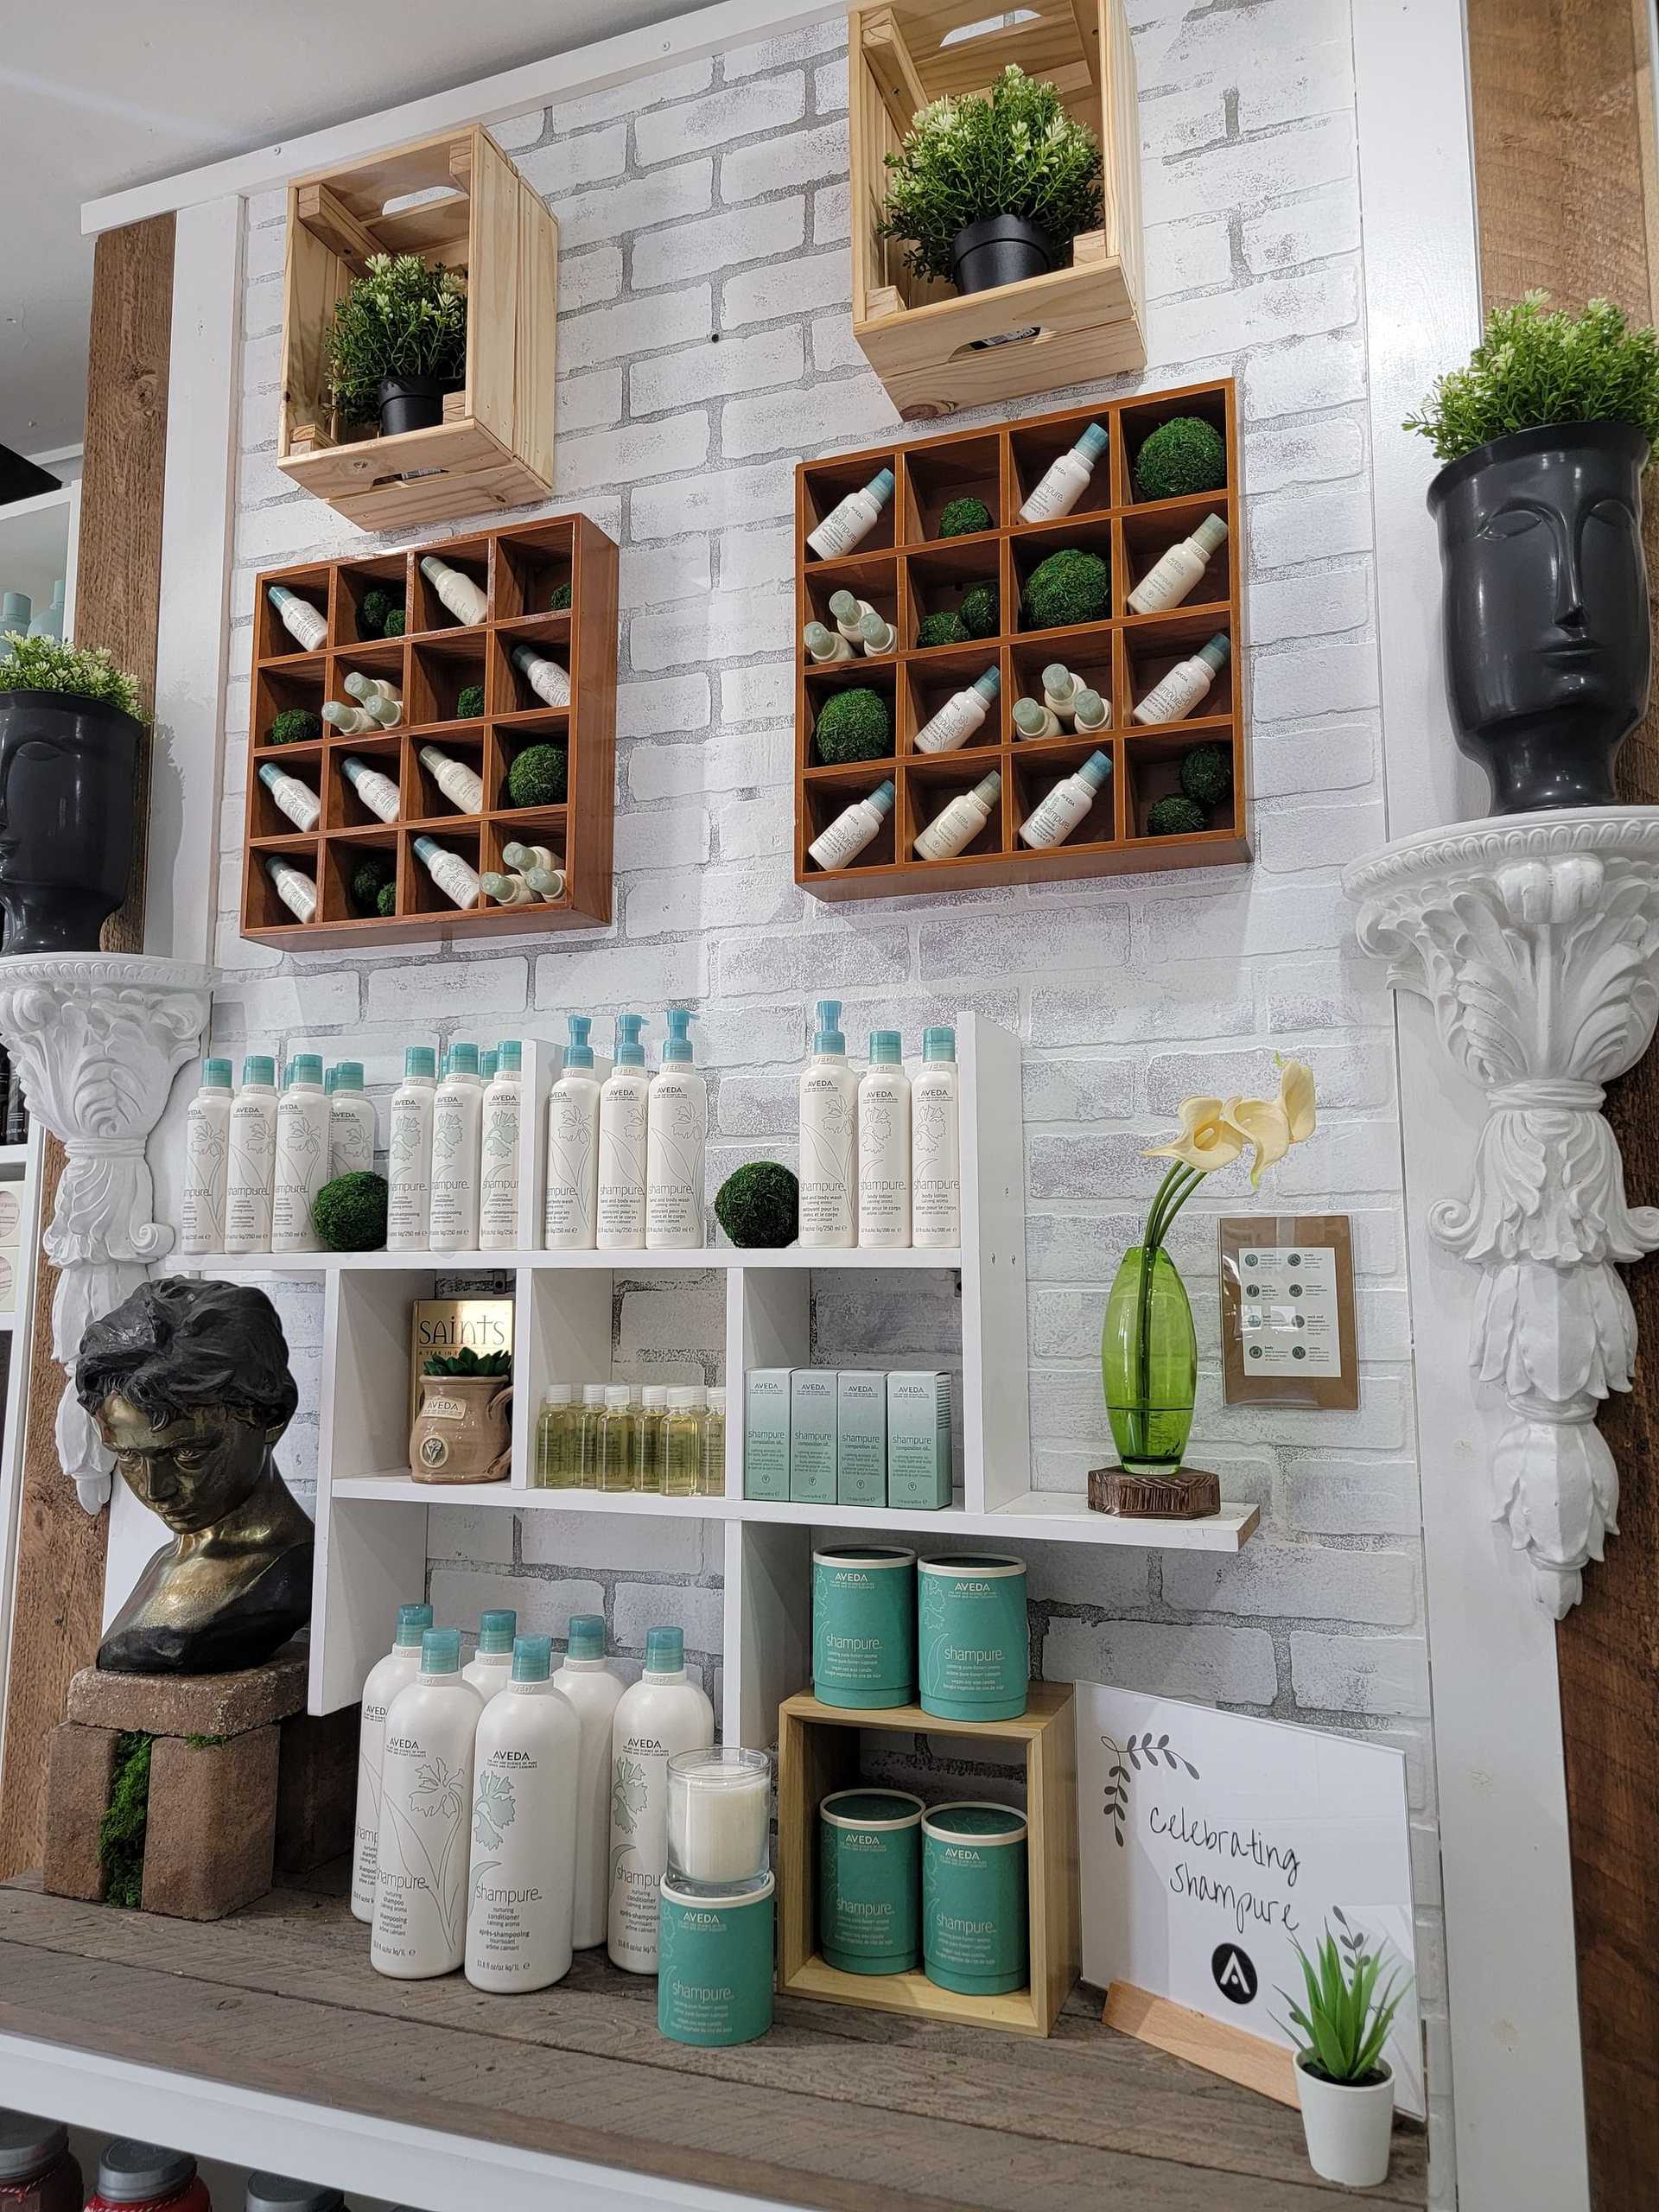 Organic beauty products displayed on shelves with decorative plants.